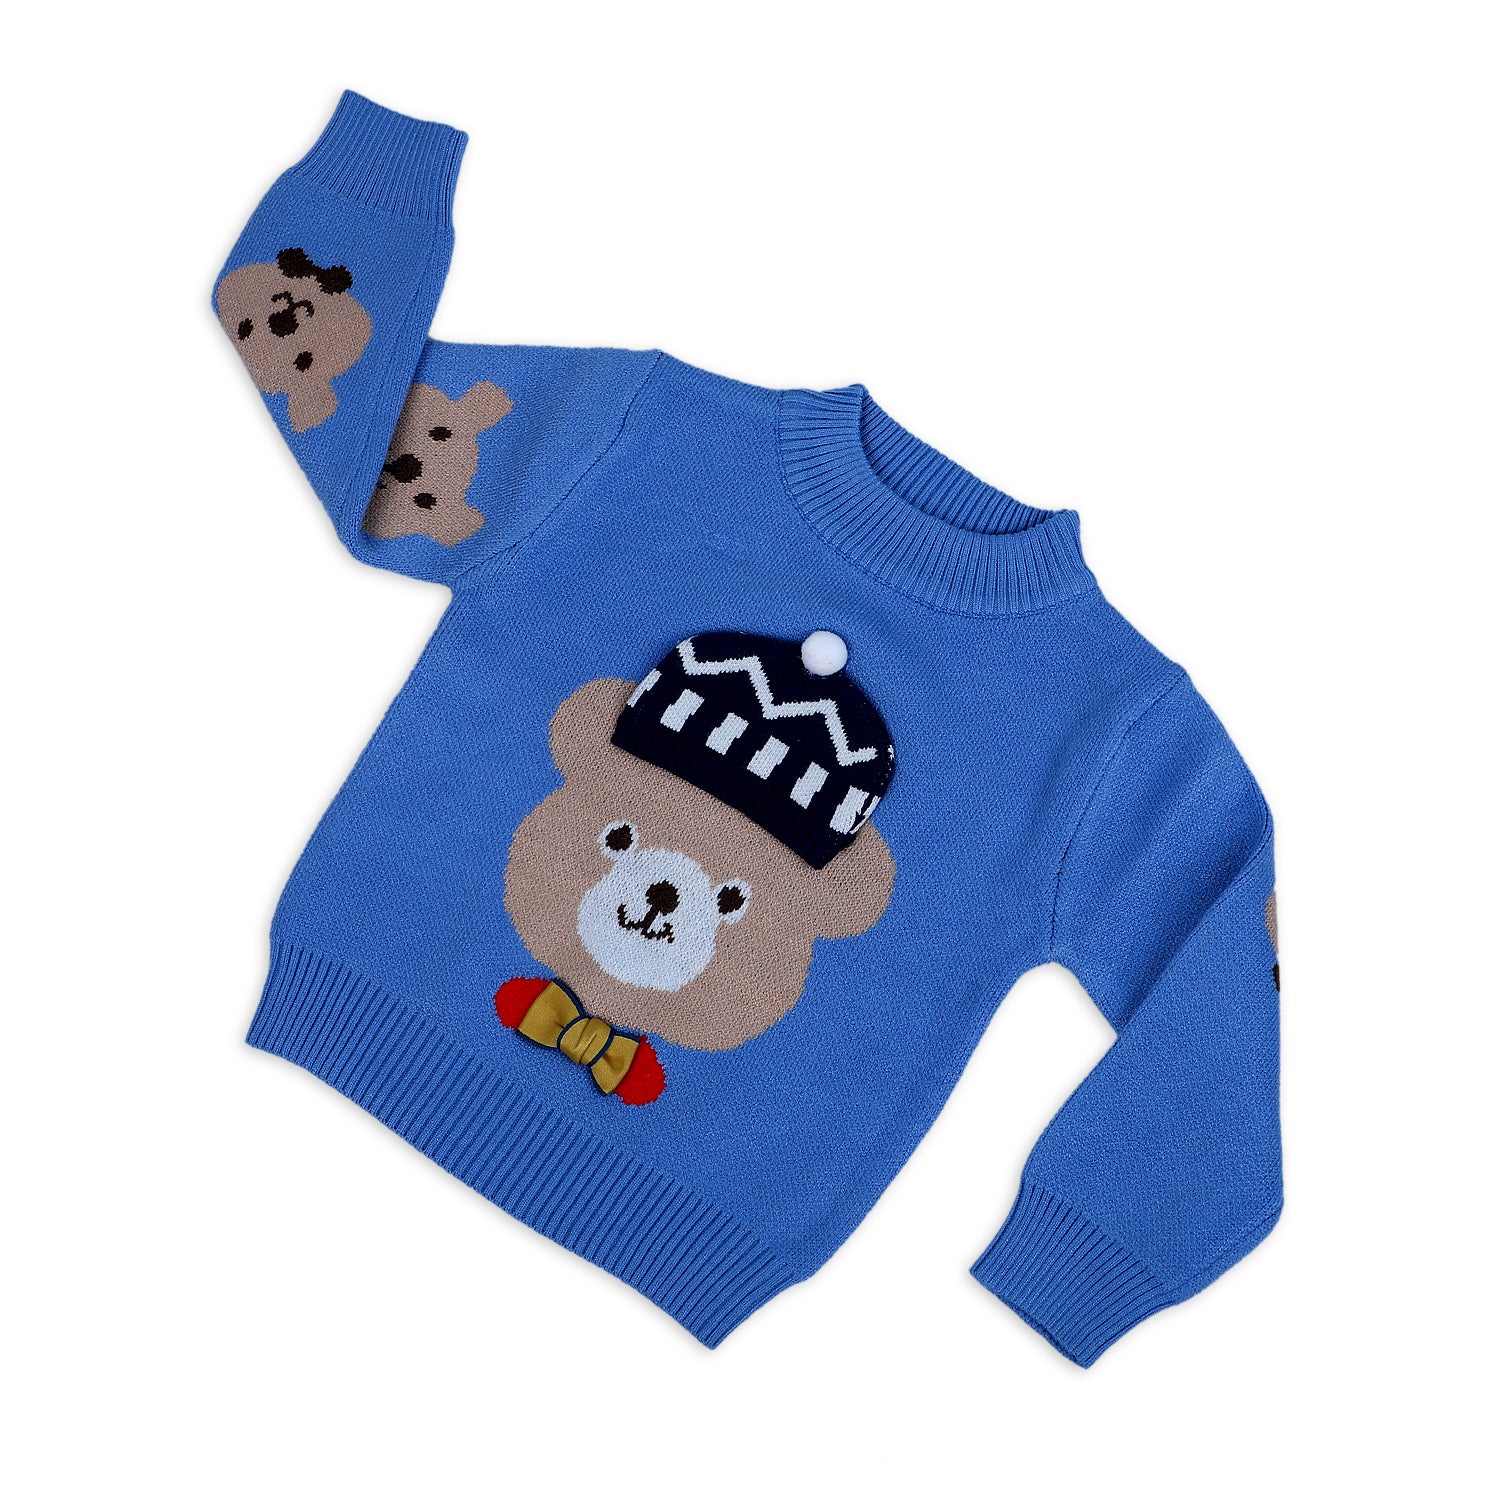 Mr. Bear Premium Full Sleeves Knitted Sweater With 3D Applique - Blue